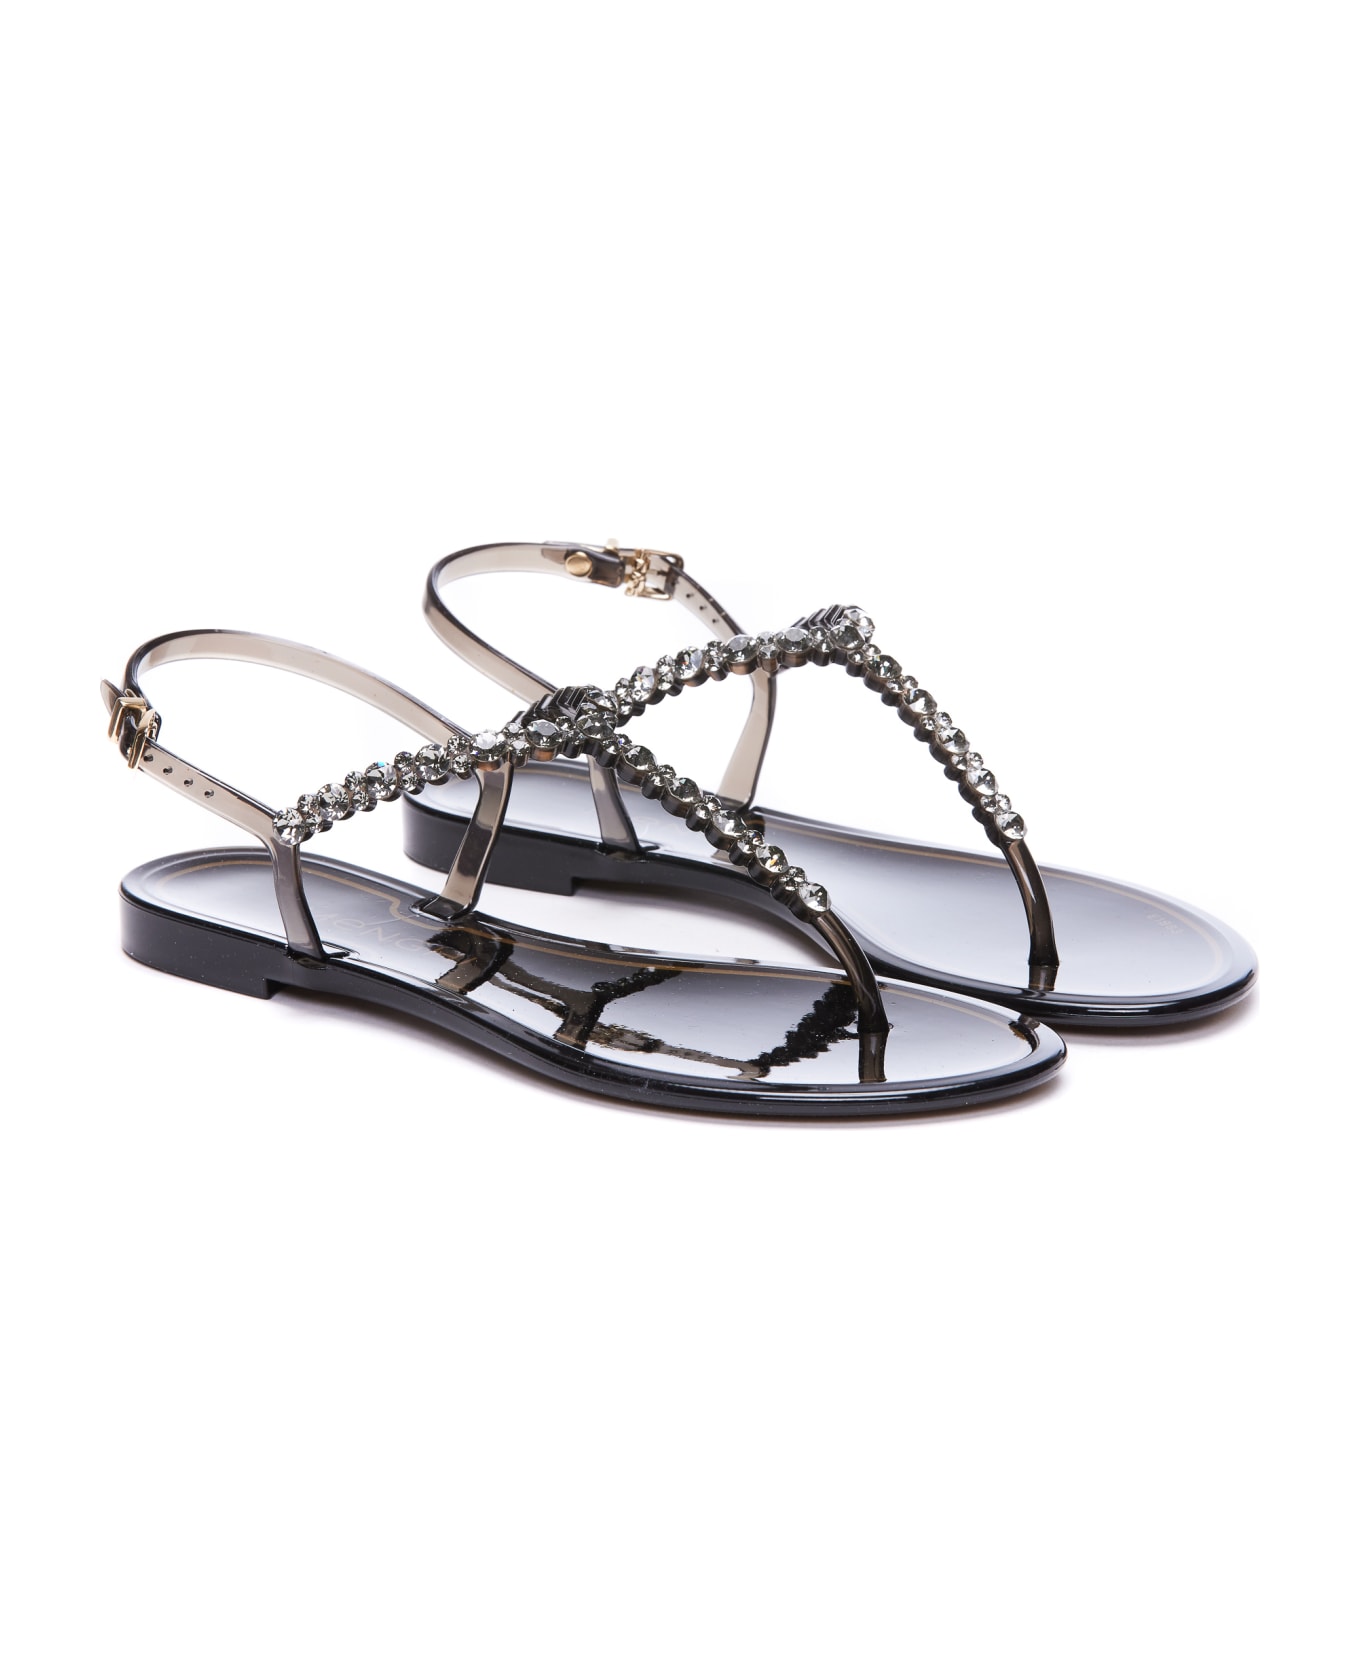 Menghi Sandals With Crystals | italist